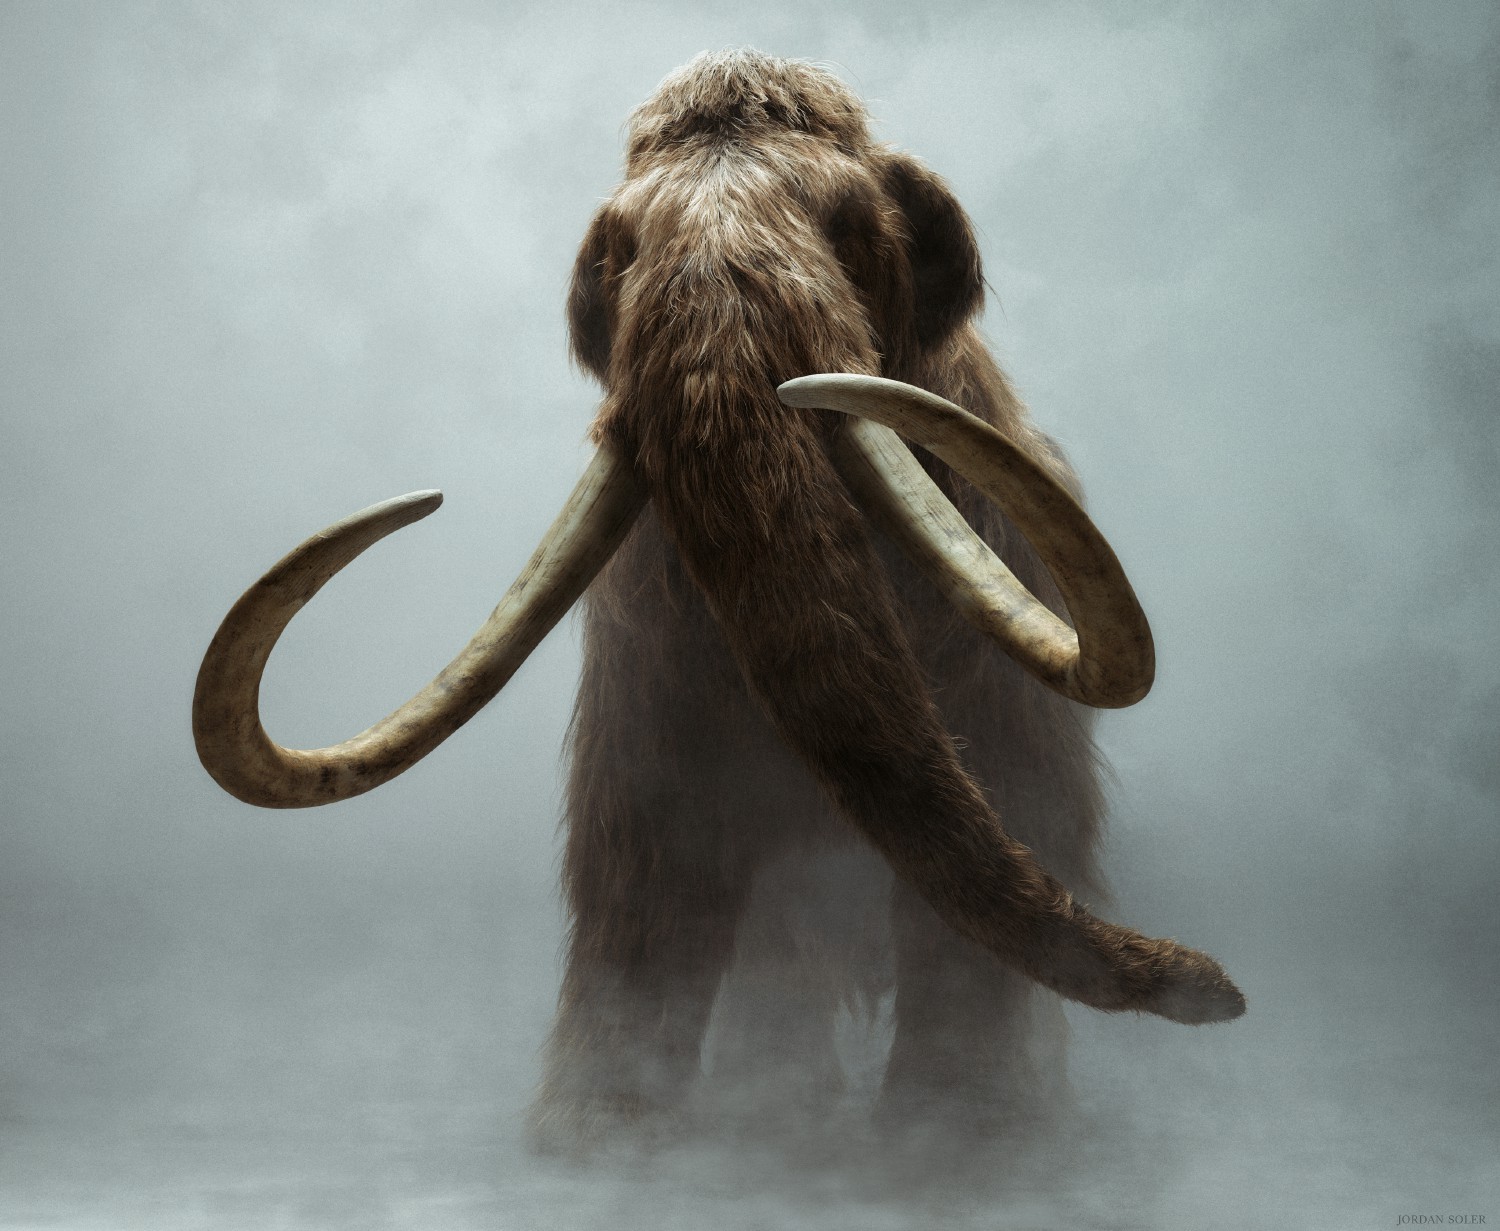 The Woolly Mammoth will thunder upon the tundra once again.